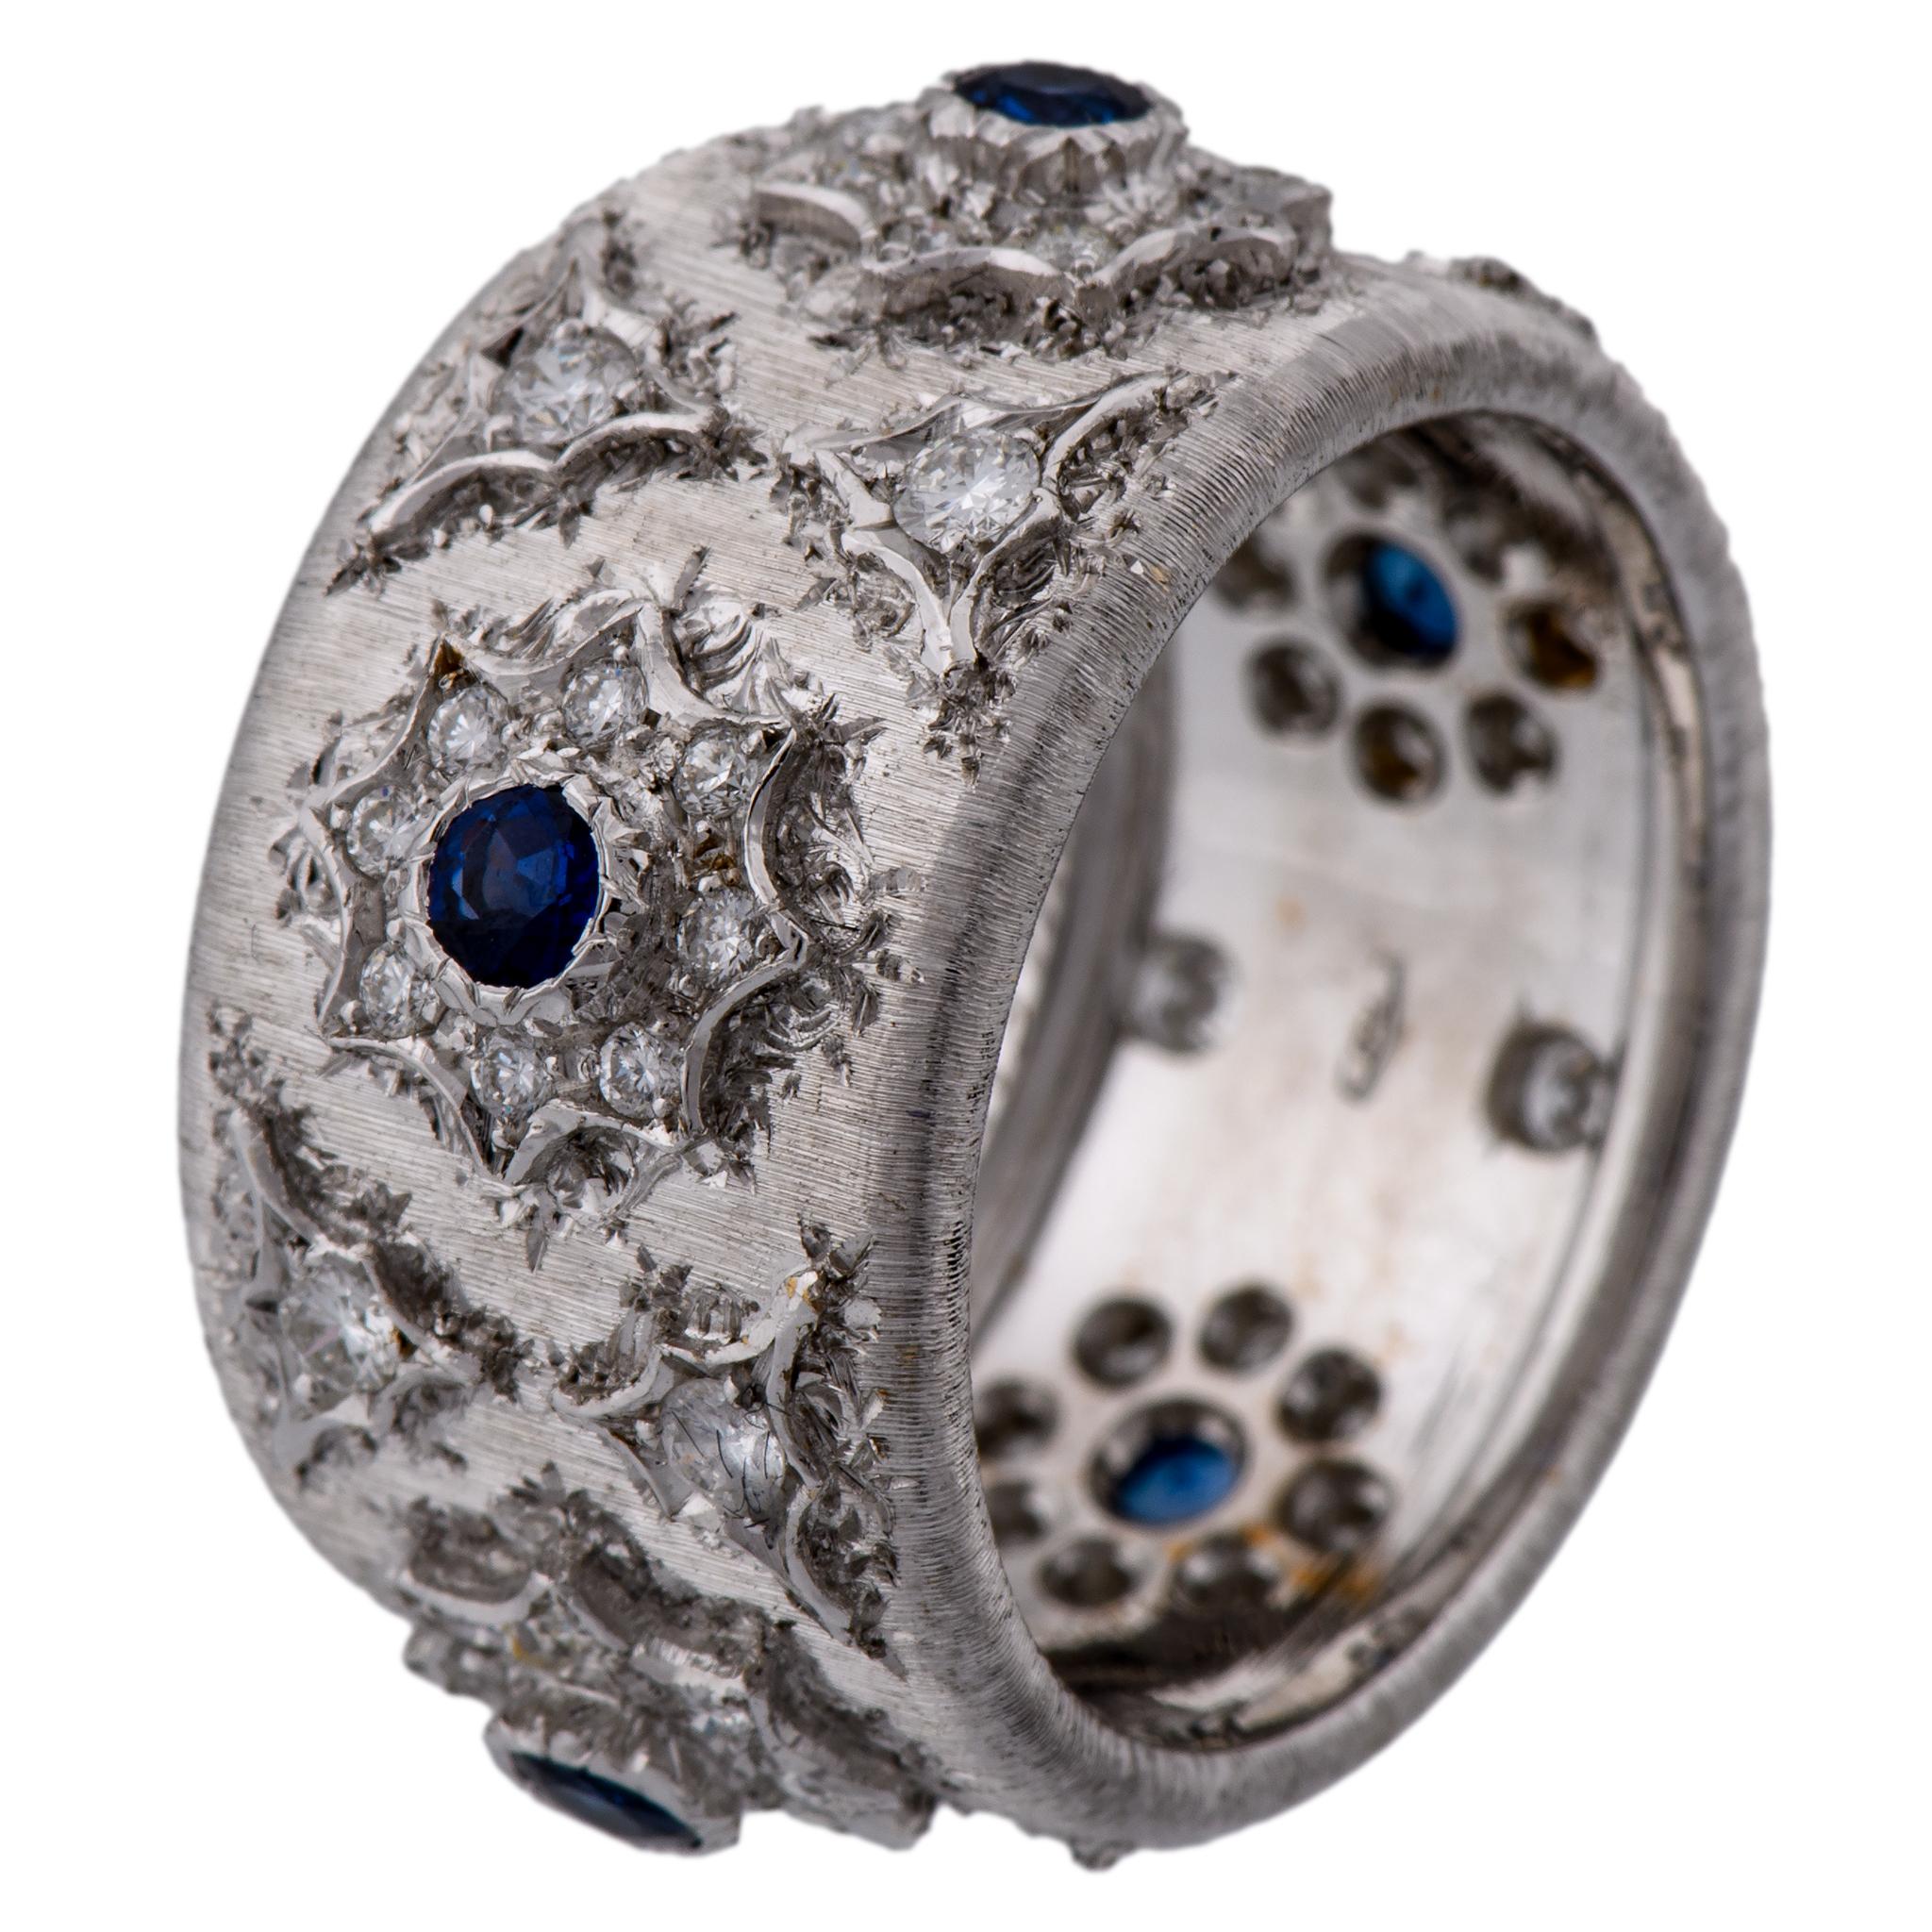 METAL TYPE: 18K White Gold
STONE WEIGHT: 1.26ct twd
TOTAL WEIGHT: 9.7g
RING SIZE: 6.5
REFERENCE #: 15373-ALXX
CONDITION: Pre-owned, Excellent condition.